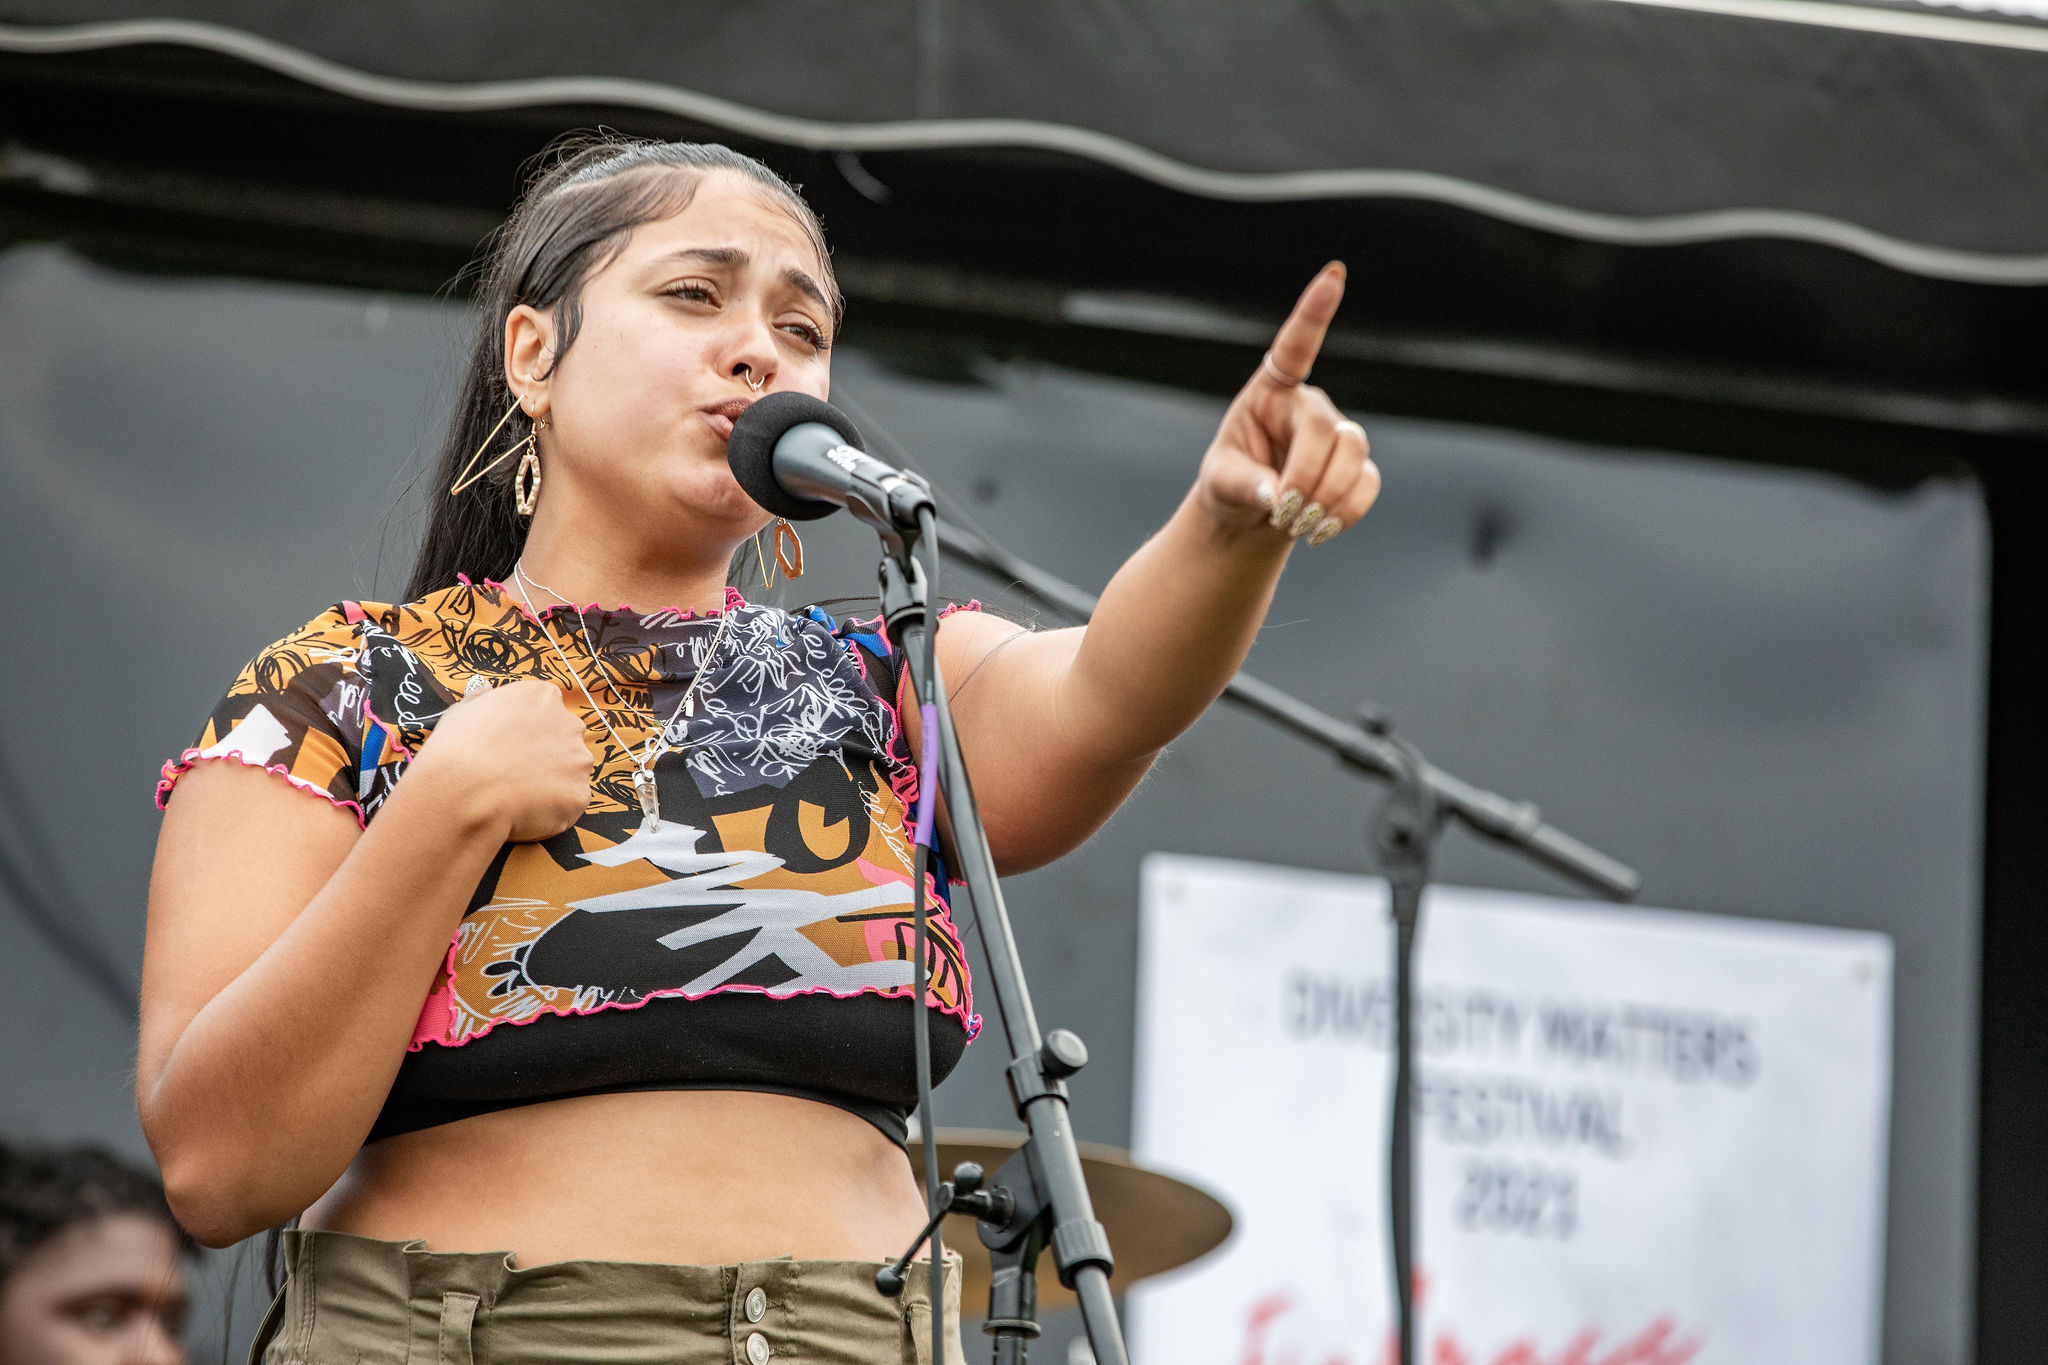 a woman in a crop top singing into a microphone.